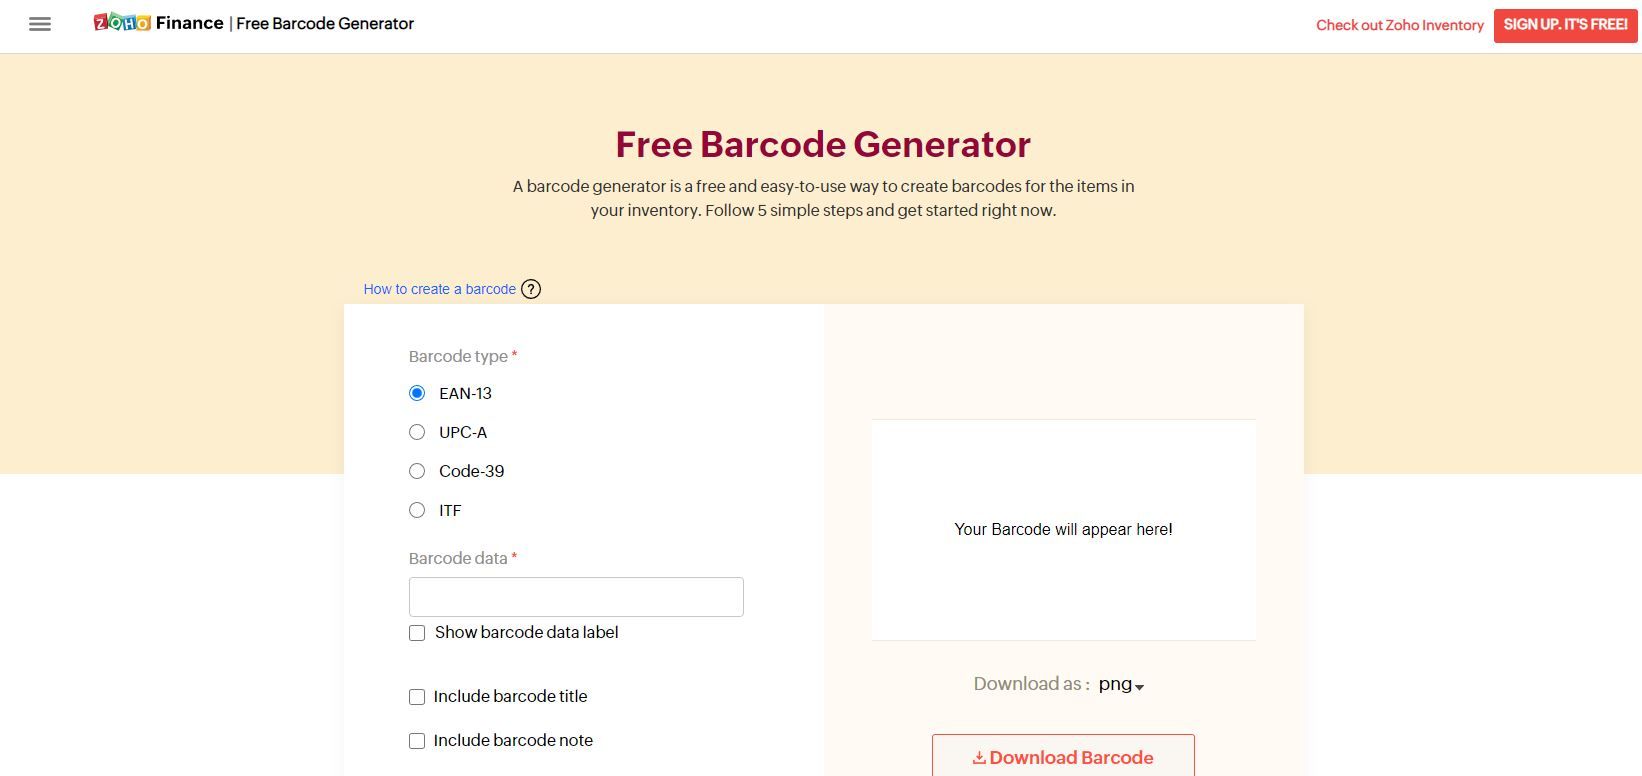 A Screenshot of the Zoho Free Online Barcode Generator in Use